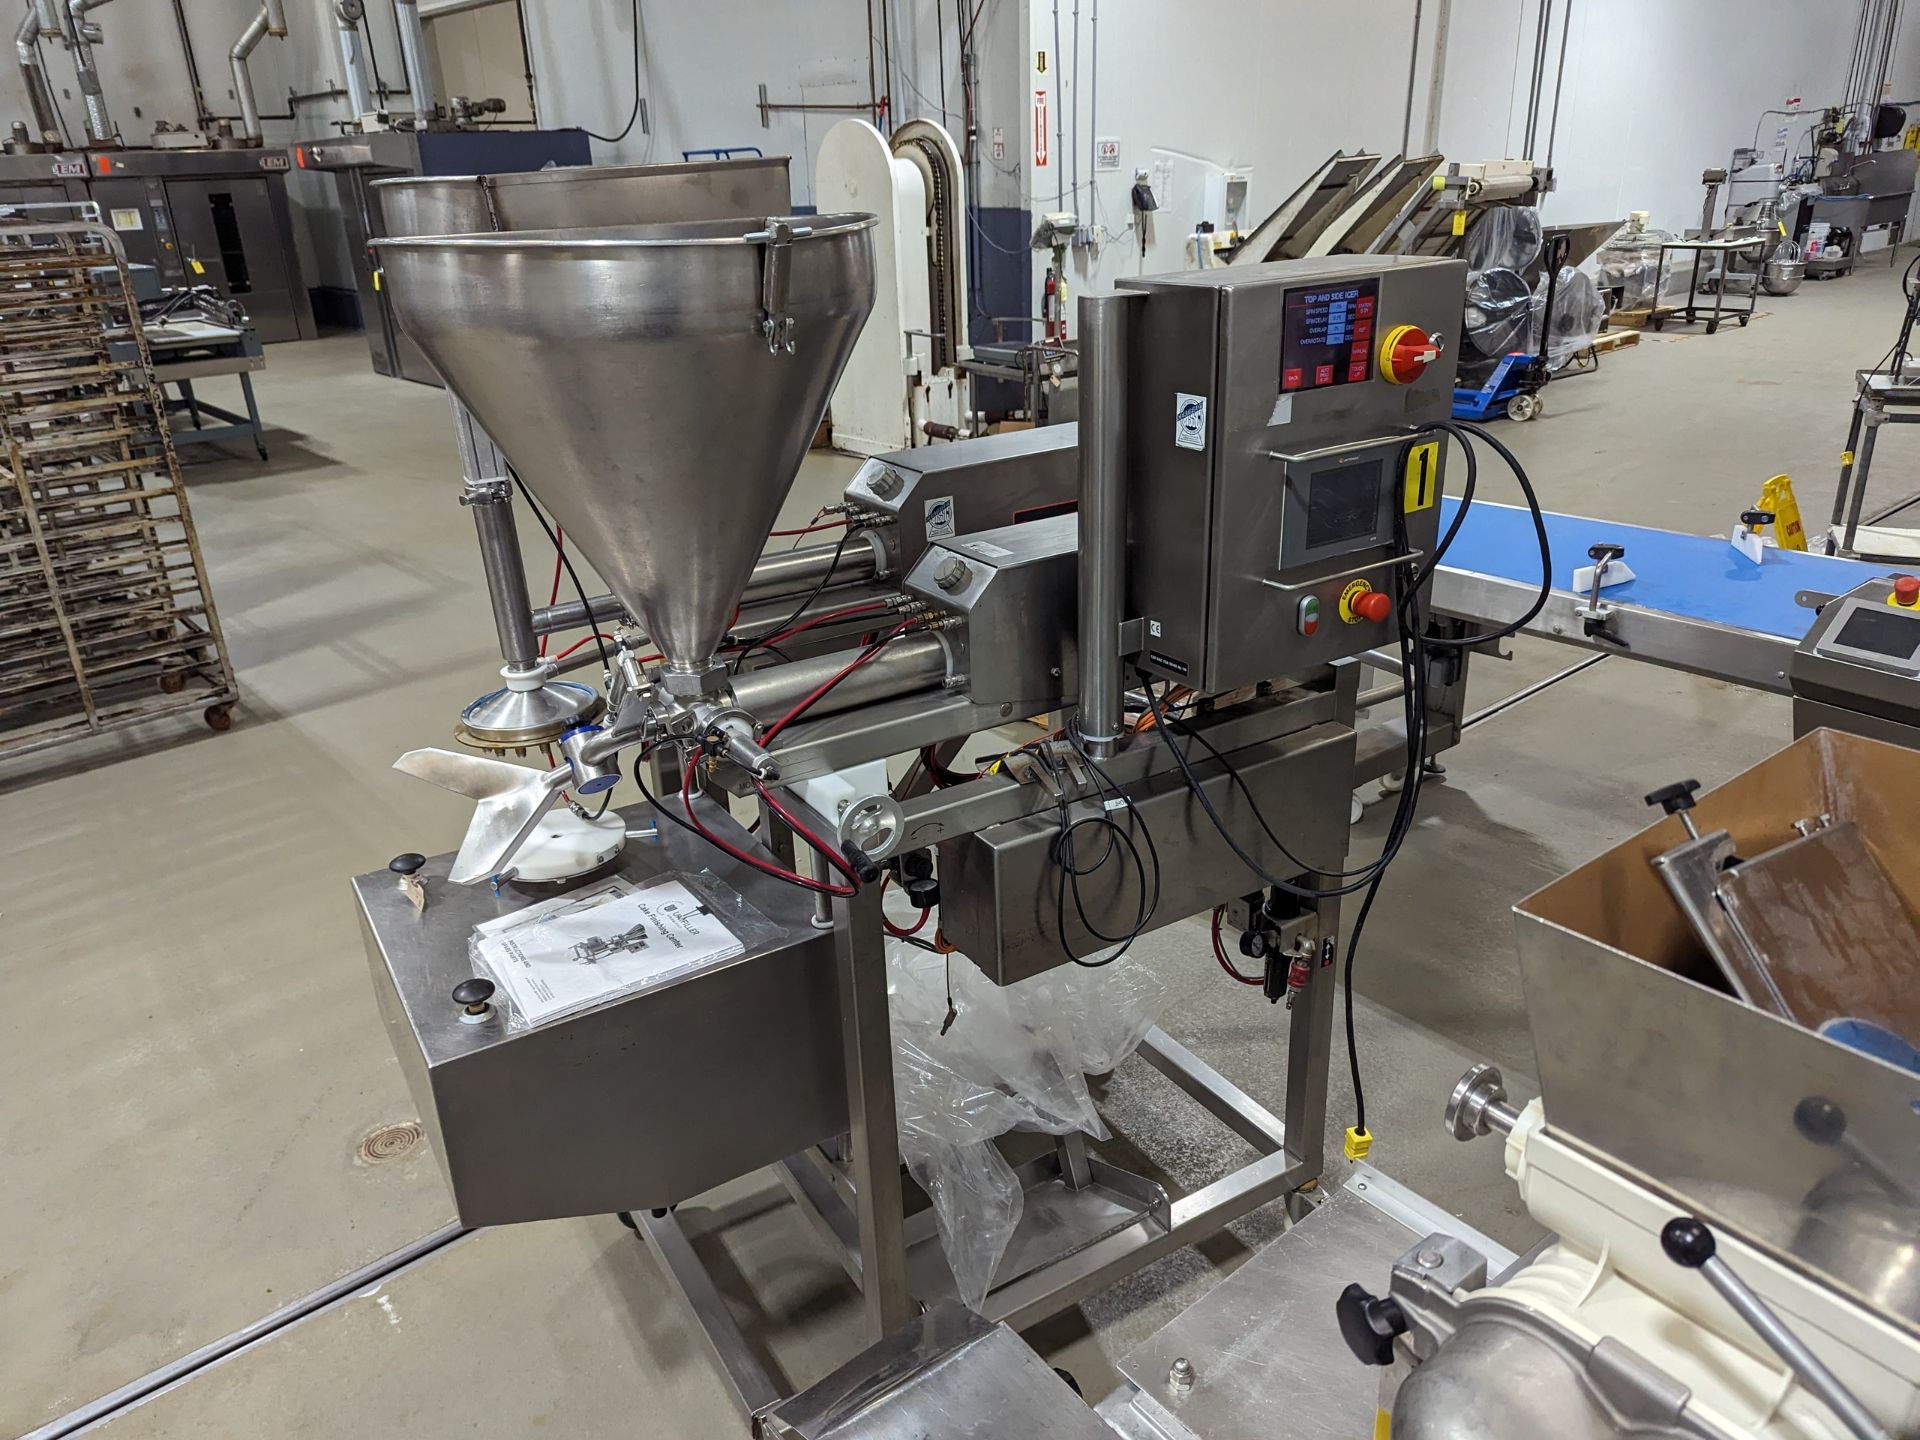 Unifiller CFC Cake Finishing Center, Dimensions LxWxH: 60x36x73 - Image 4 of 7